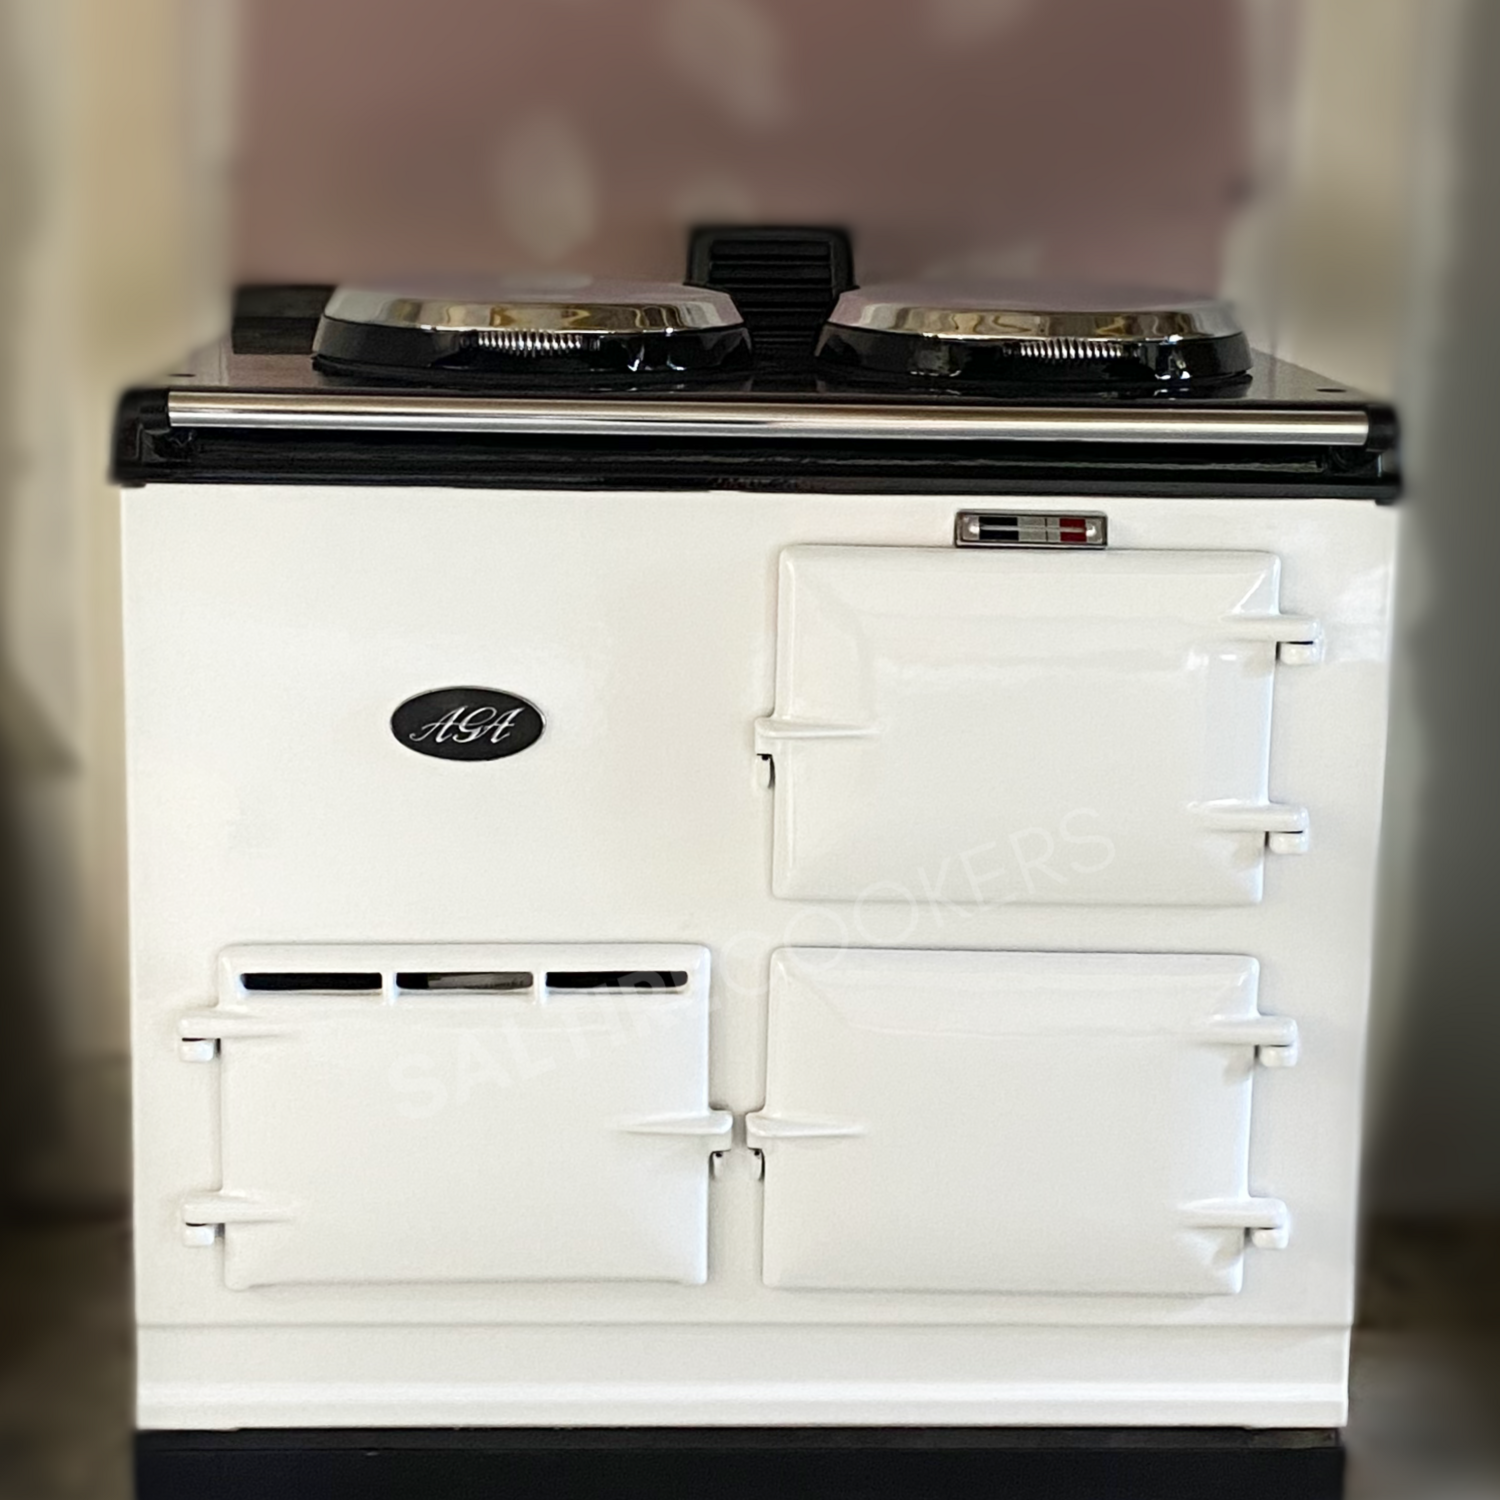 Reconditioned 2 Oven BF Gas Aga Cooker (White)